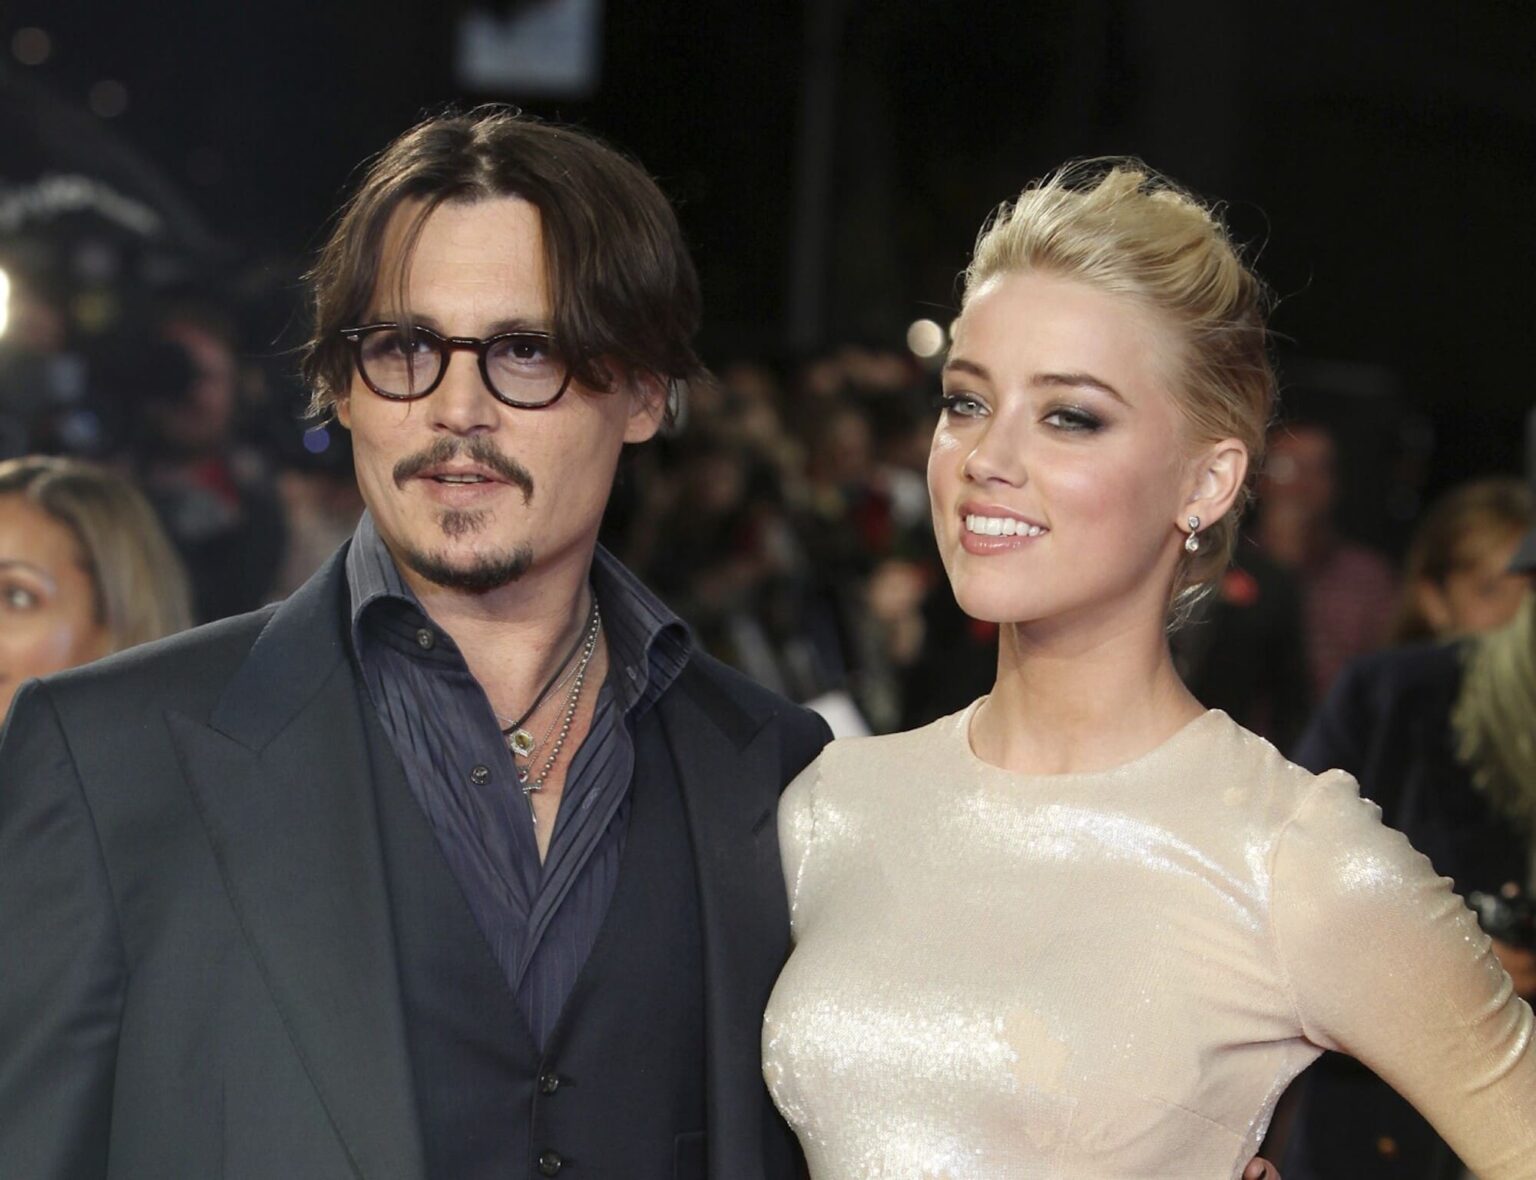 Let’s just say that this divorce has been anything but smooth. Find out what Amber Heard's net worth is and how it might be affected by her legal battles.